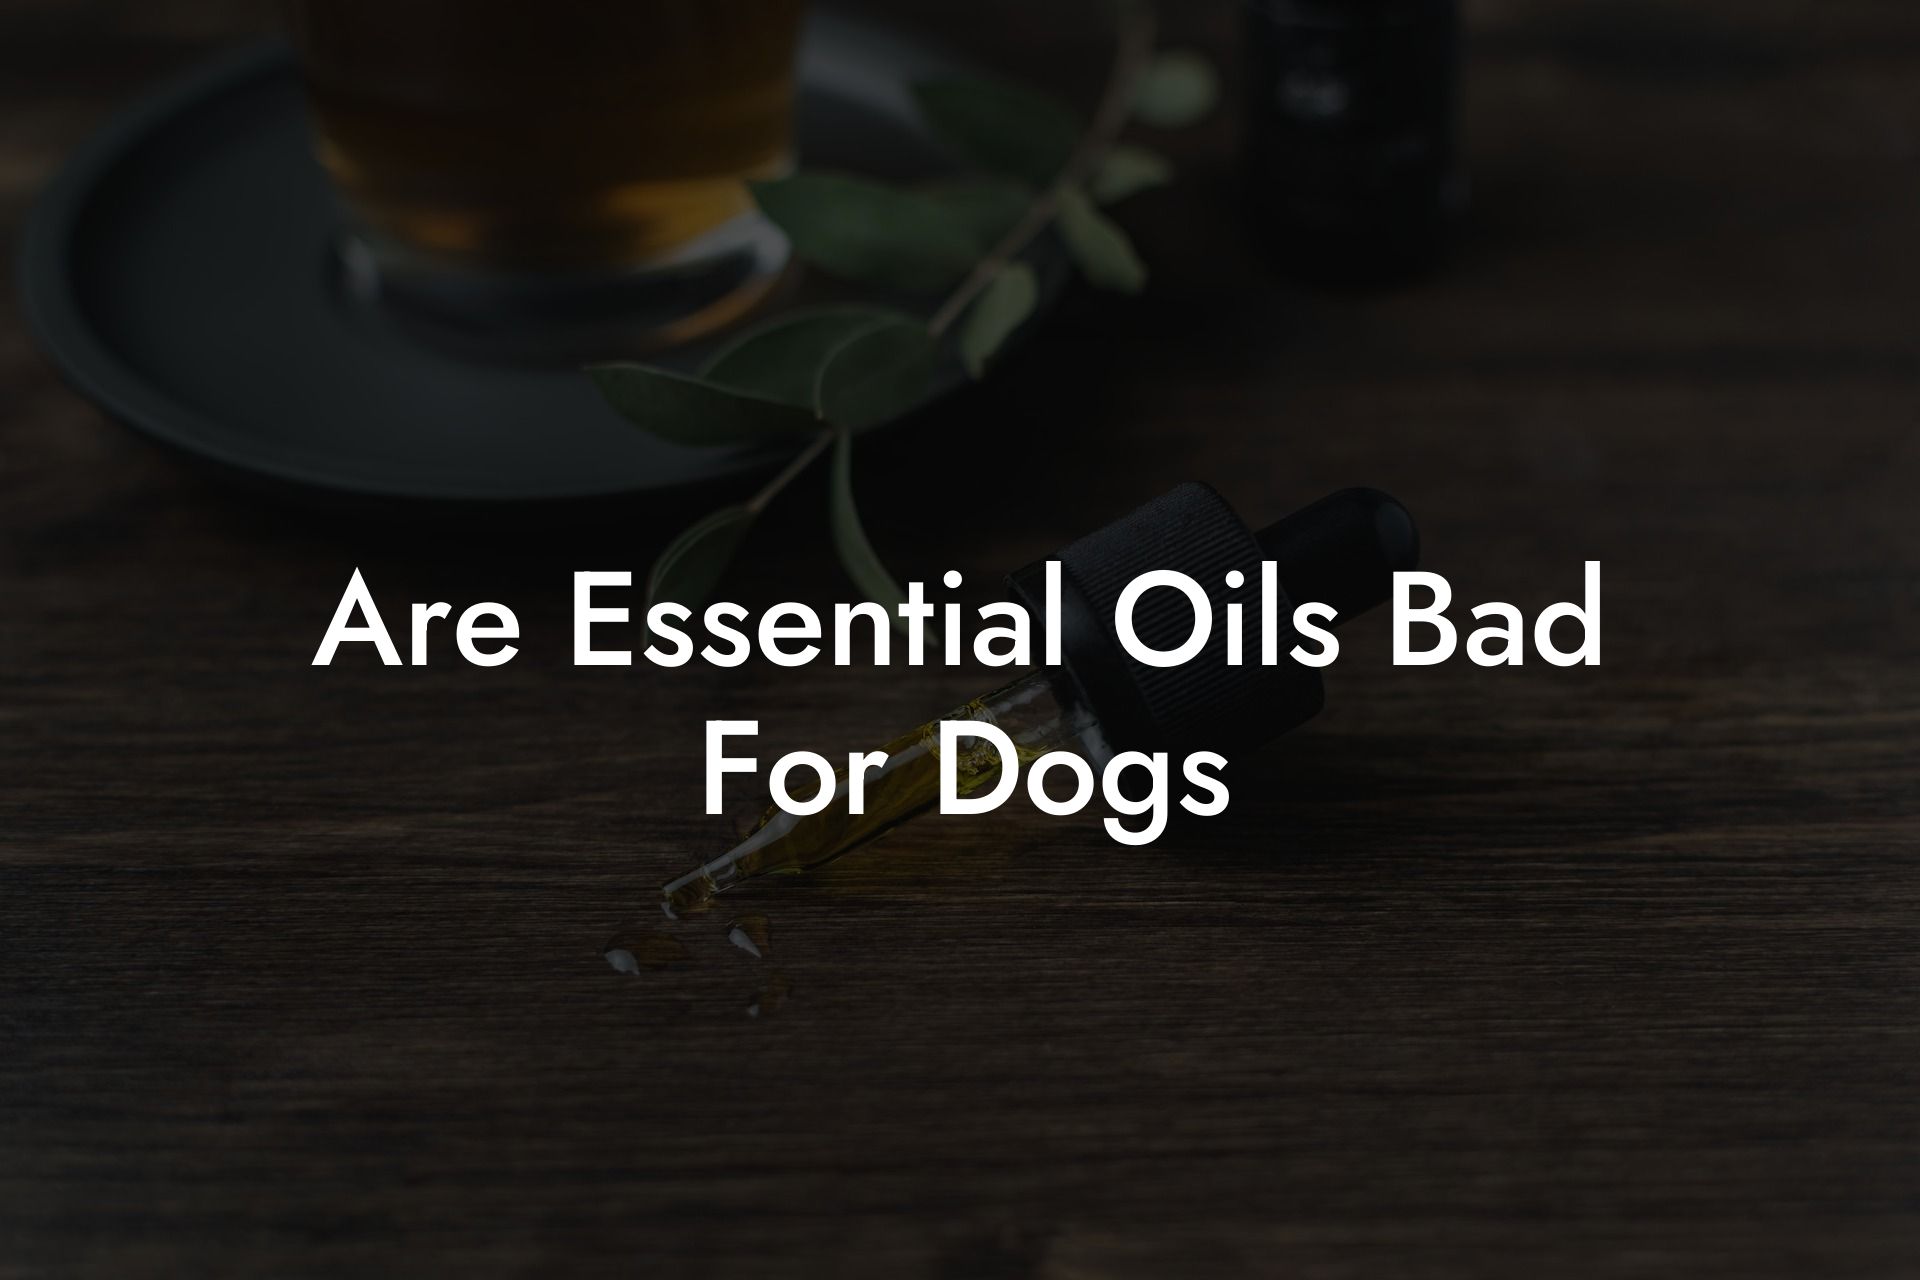 Are Essential Oils Bad For Dogs